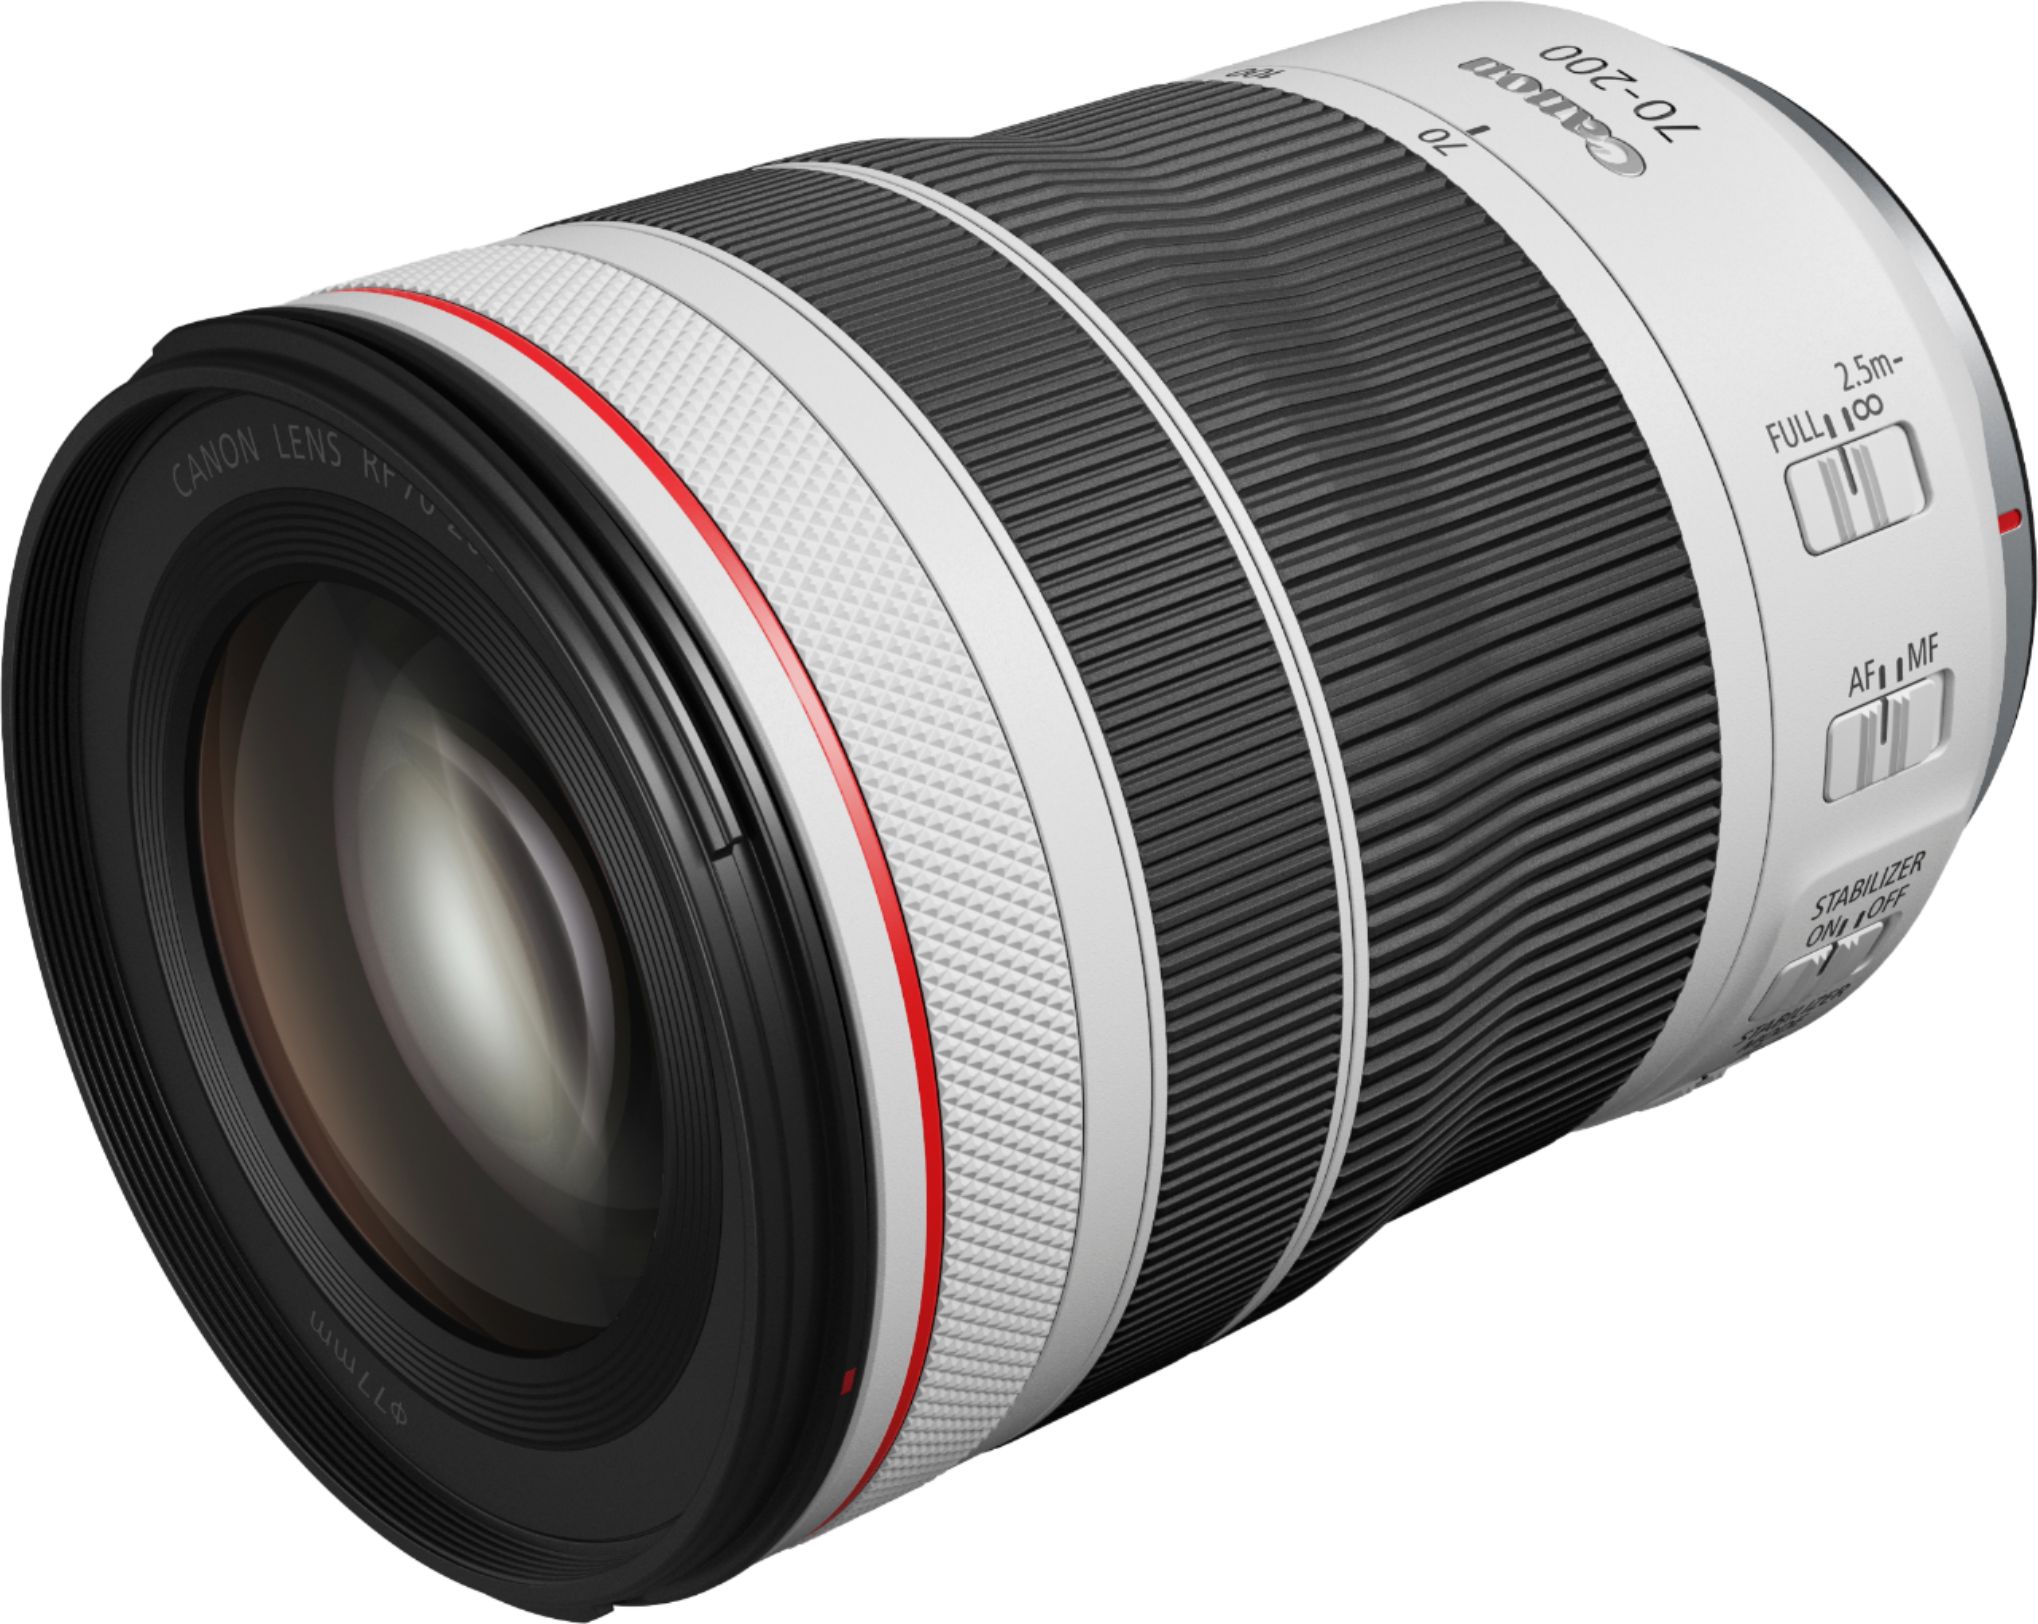 Angle View: Canon - RF 70-200mm f/4 L IS USM Telephoto Zoom Lens for RF Mount Cameras - White